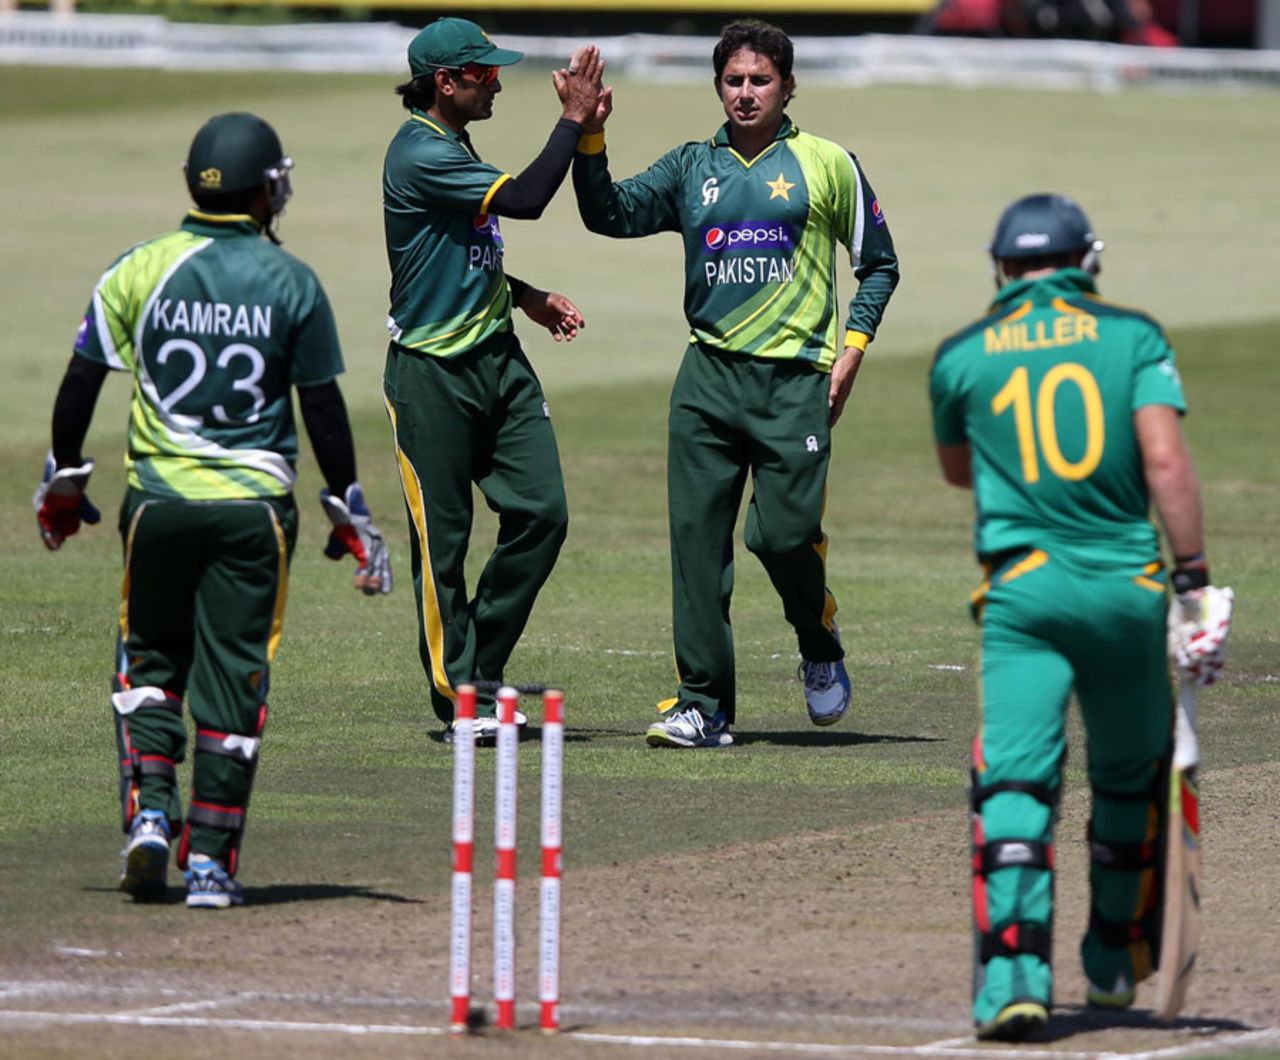 David Miller is dismissed by Saeed Ajmal, South Africa v Pakistan, 4th ODI, Durban, March 21, 2013